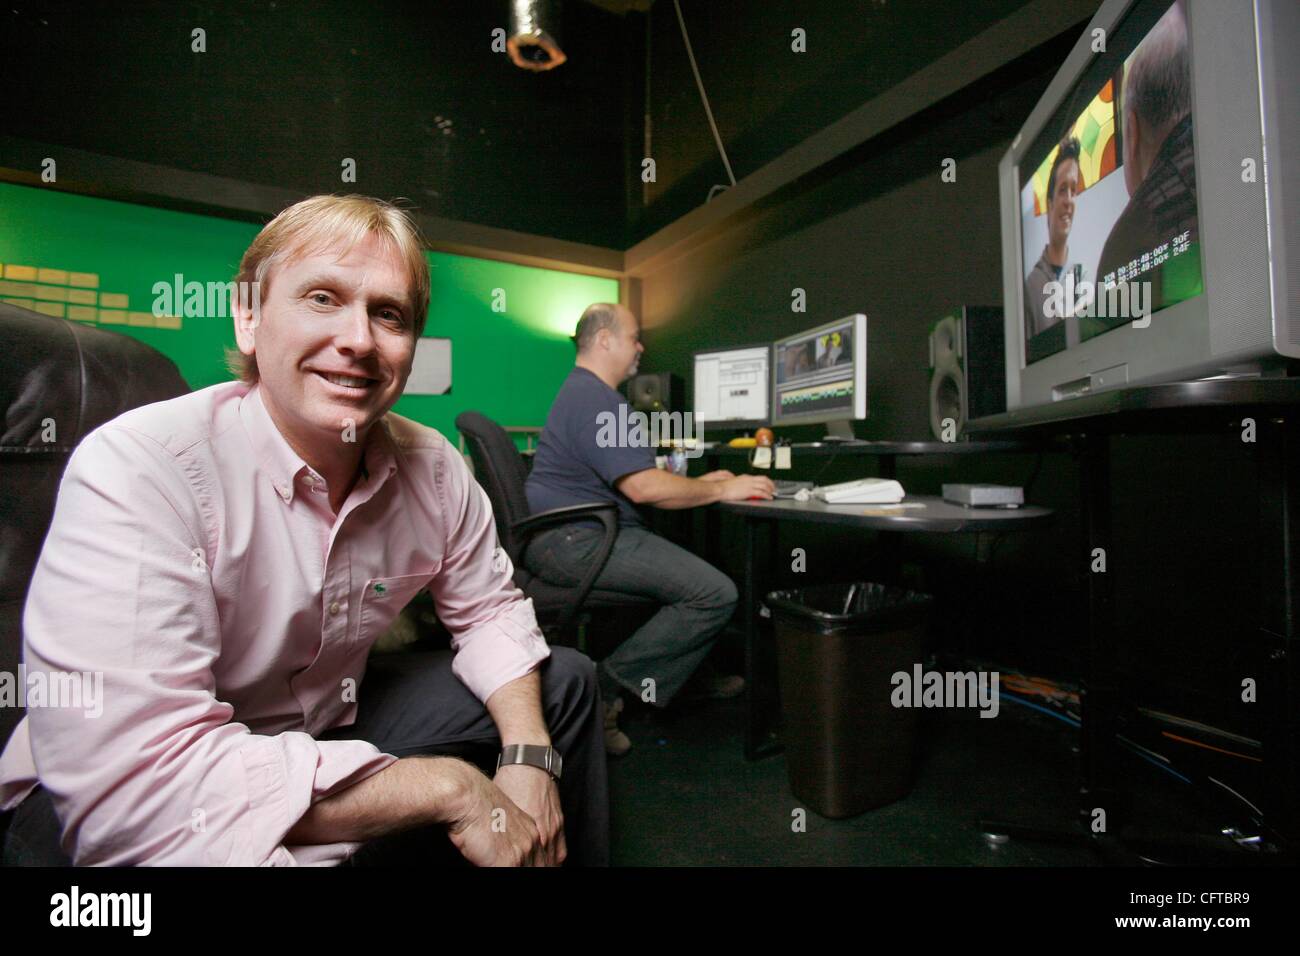 Film director Del Shores who created 'Sordid Lives' play, film and now a new television series by the same name, is photographed at editing room at the Post Group in Hollywood.   (Photo by Ringo Chiu / Zuma Press) Stock Photo